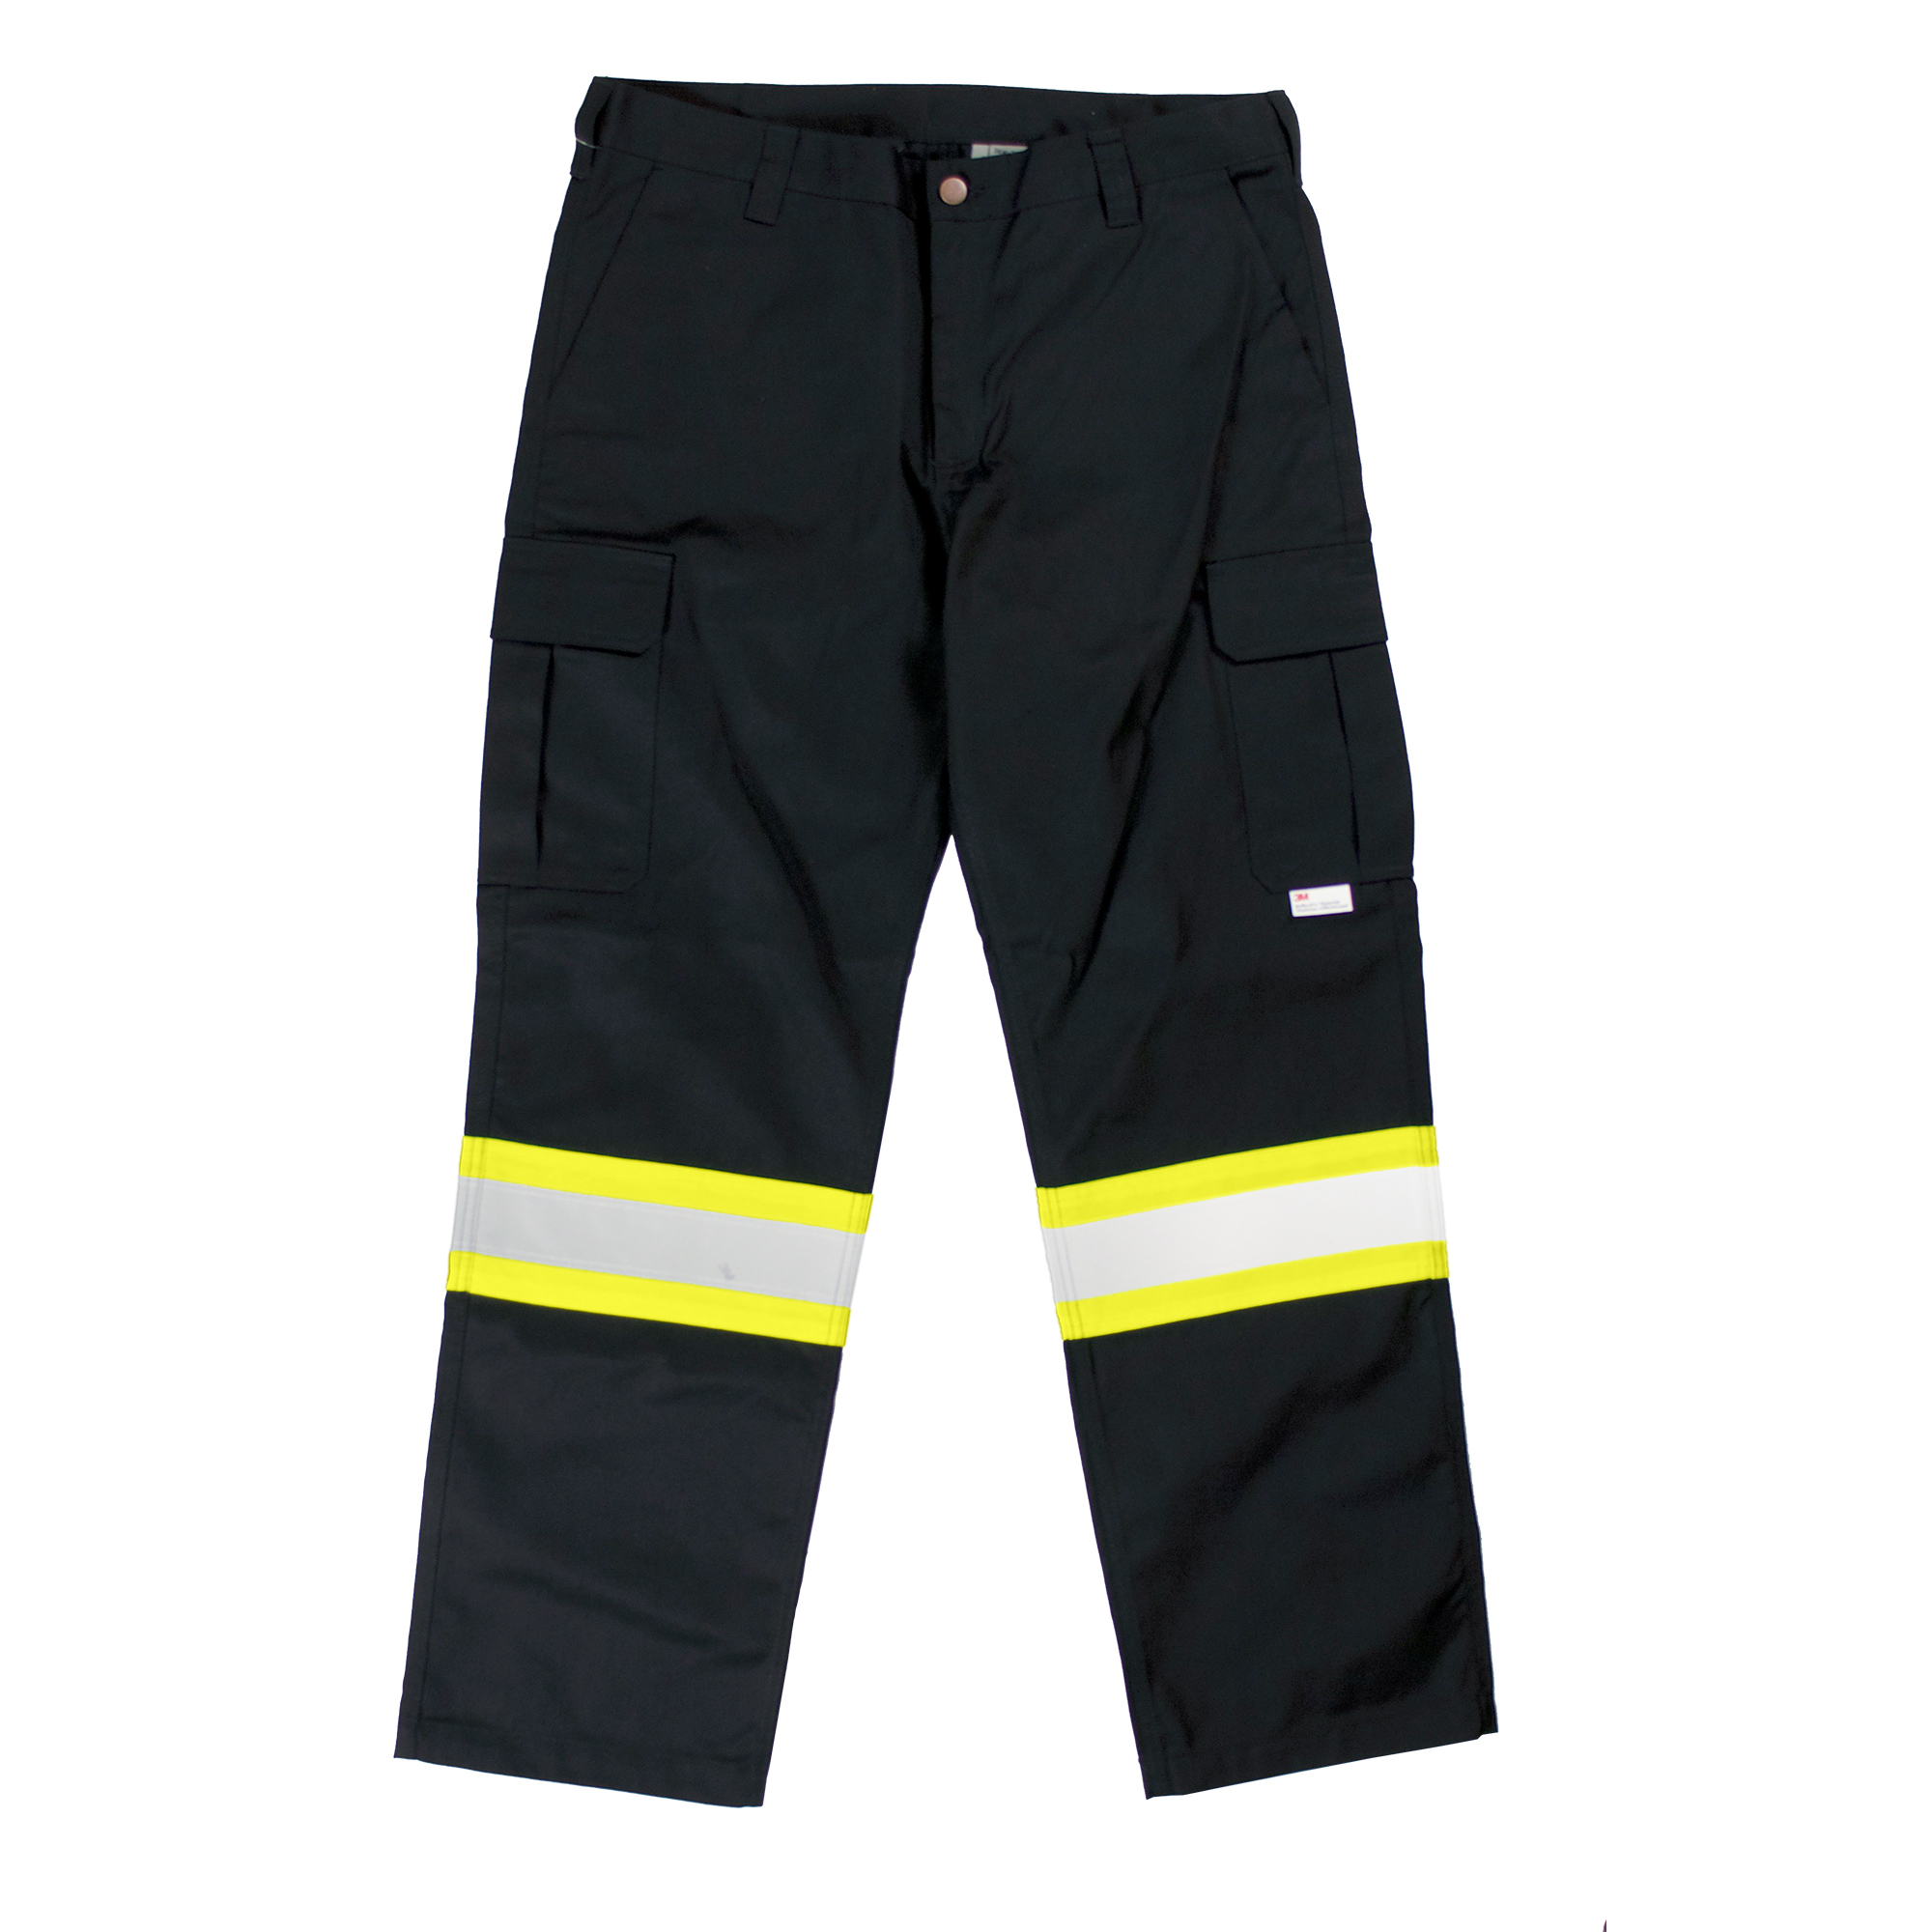 Tough Duck, Safety Cargo Utility Pant, Waist 38 in, Inseam 30 in, Color Black, Model S60701